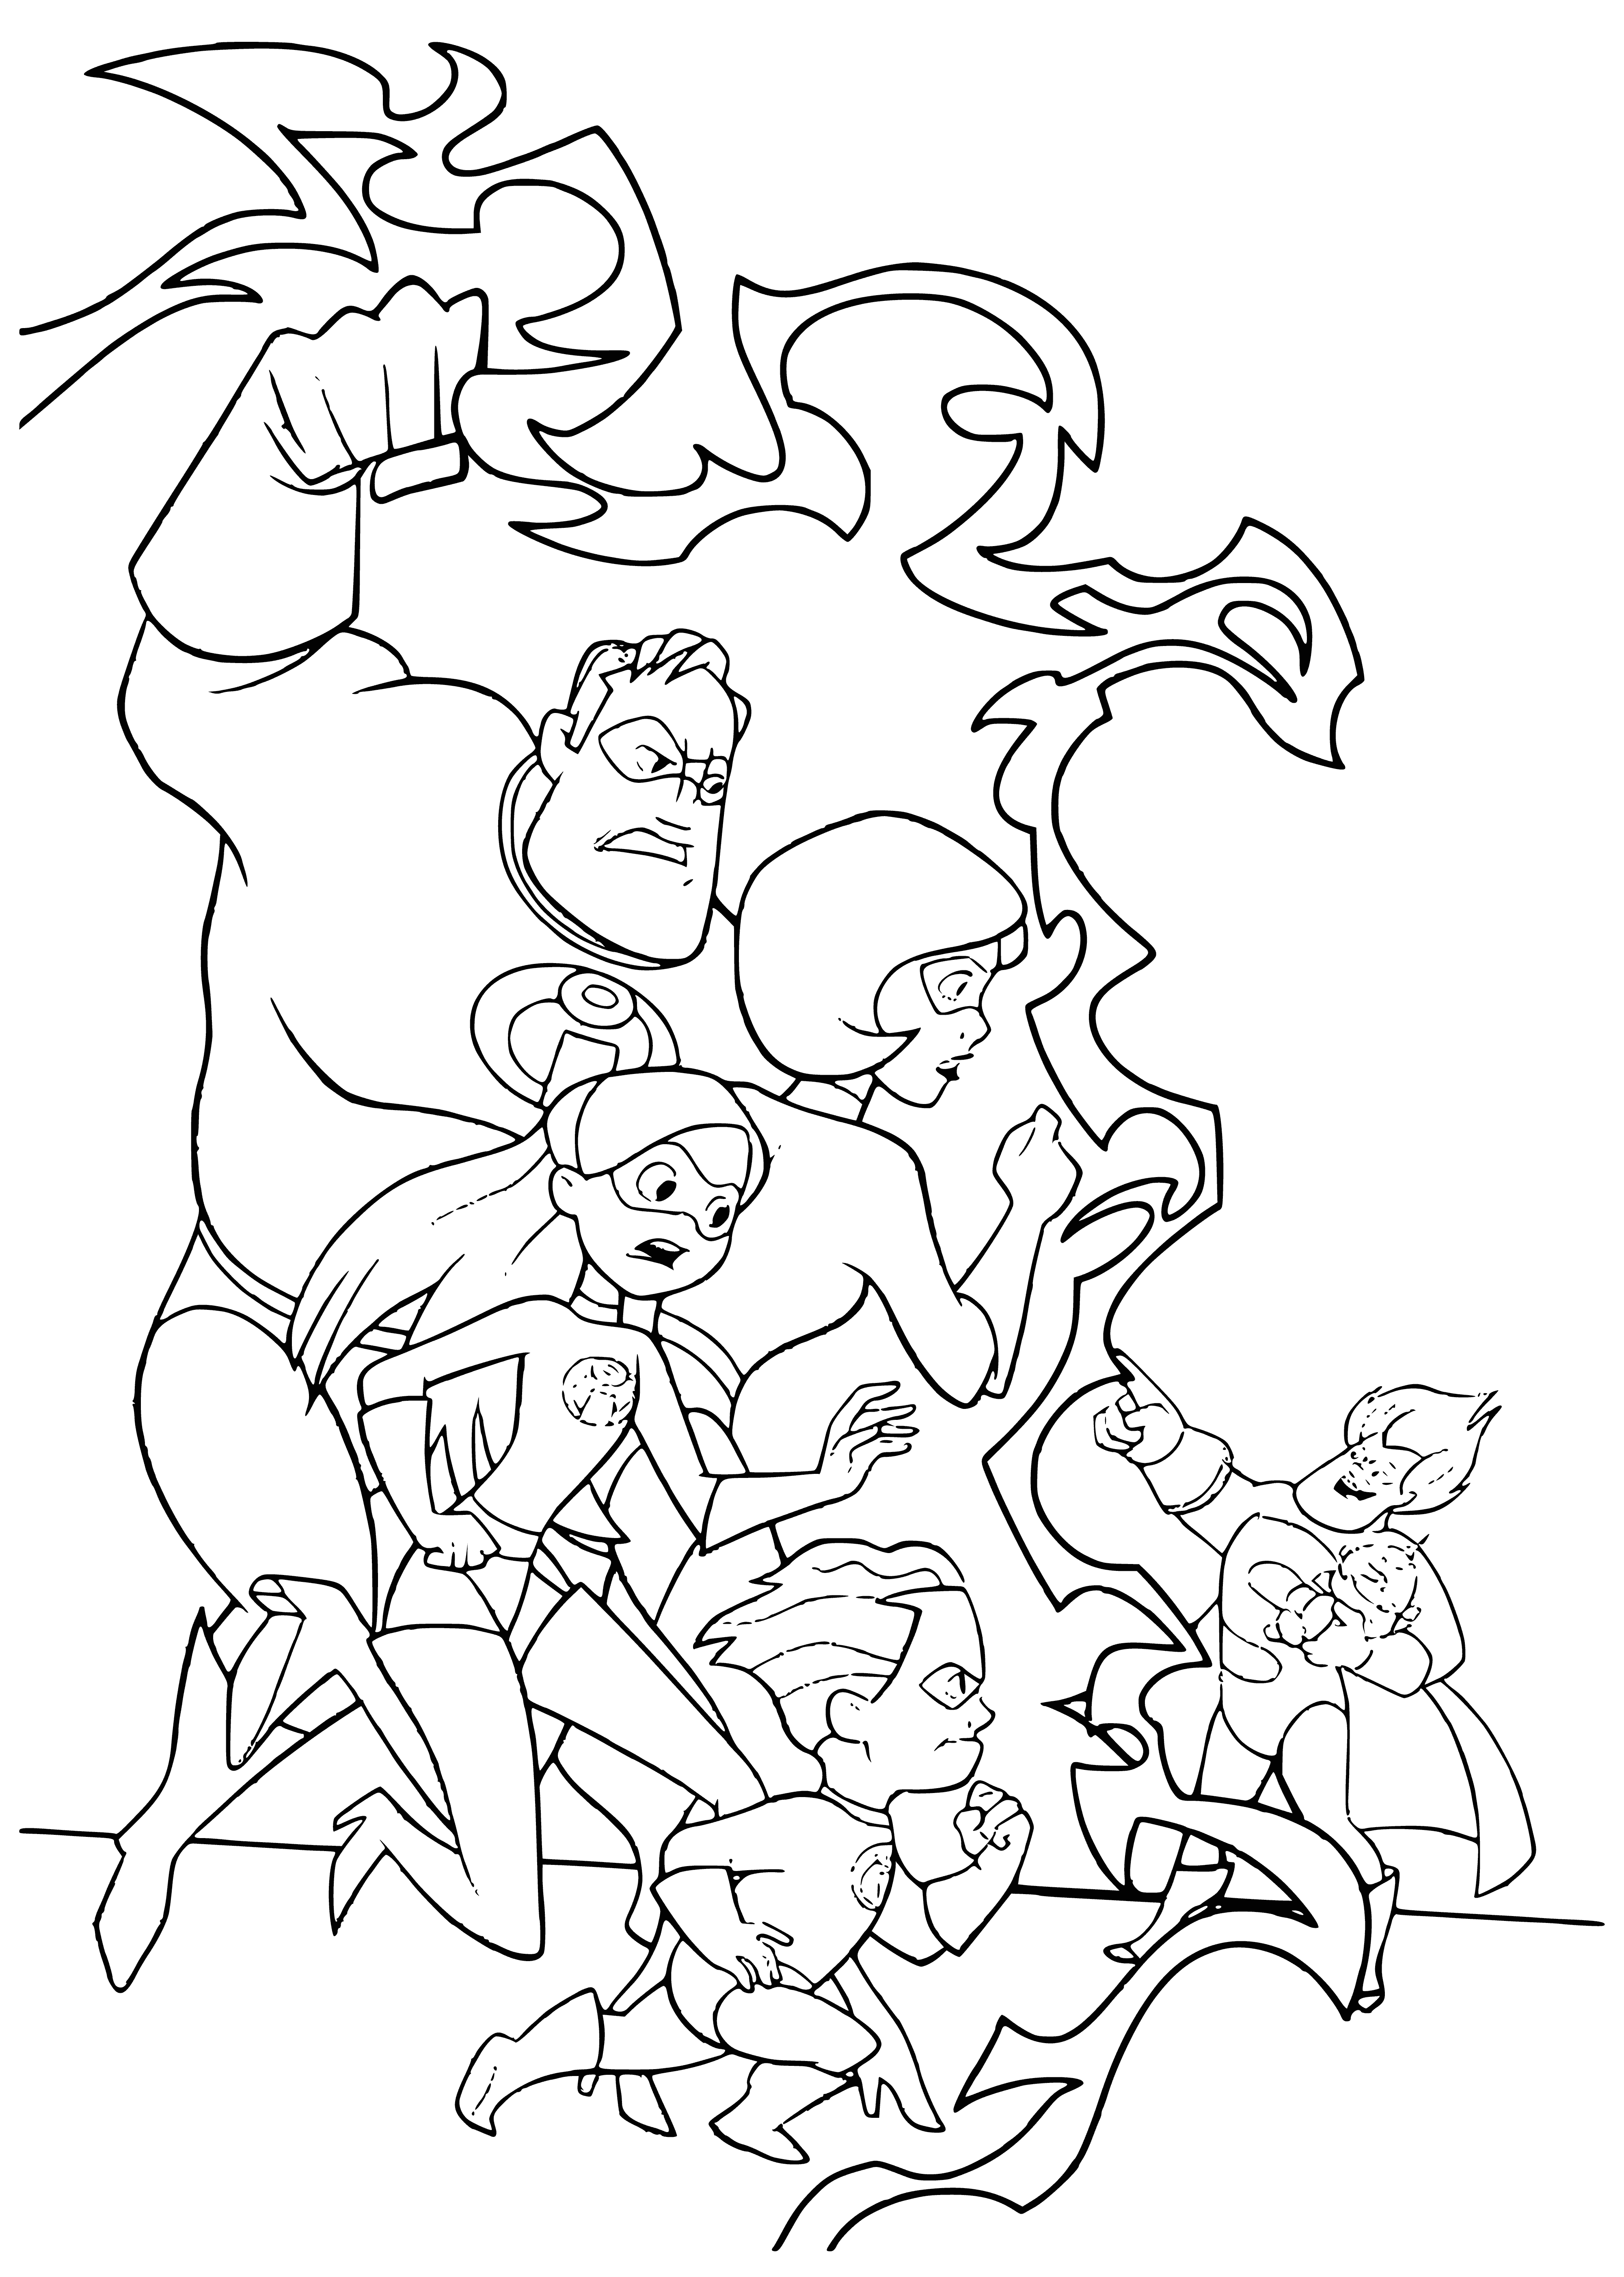 Incredibles Fights Syndrome coloring page